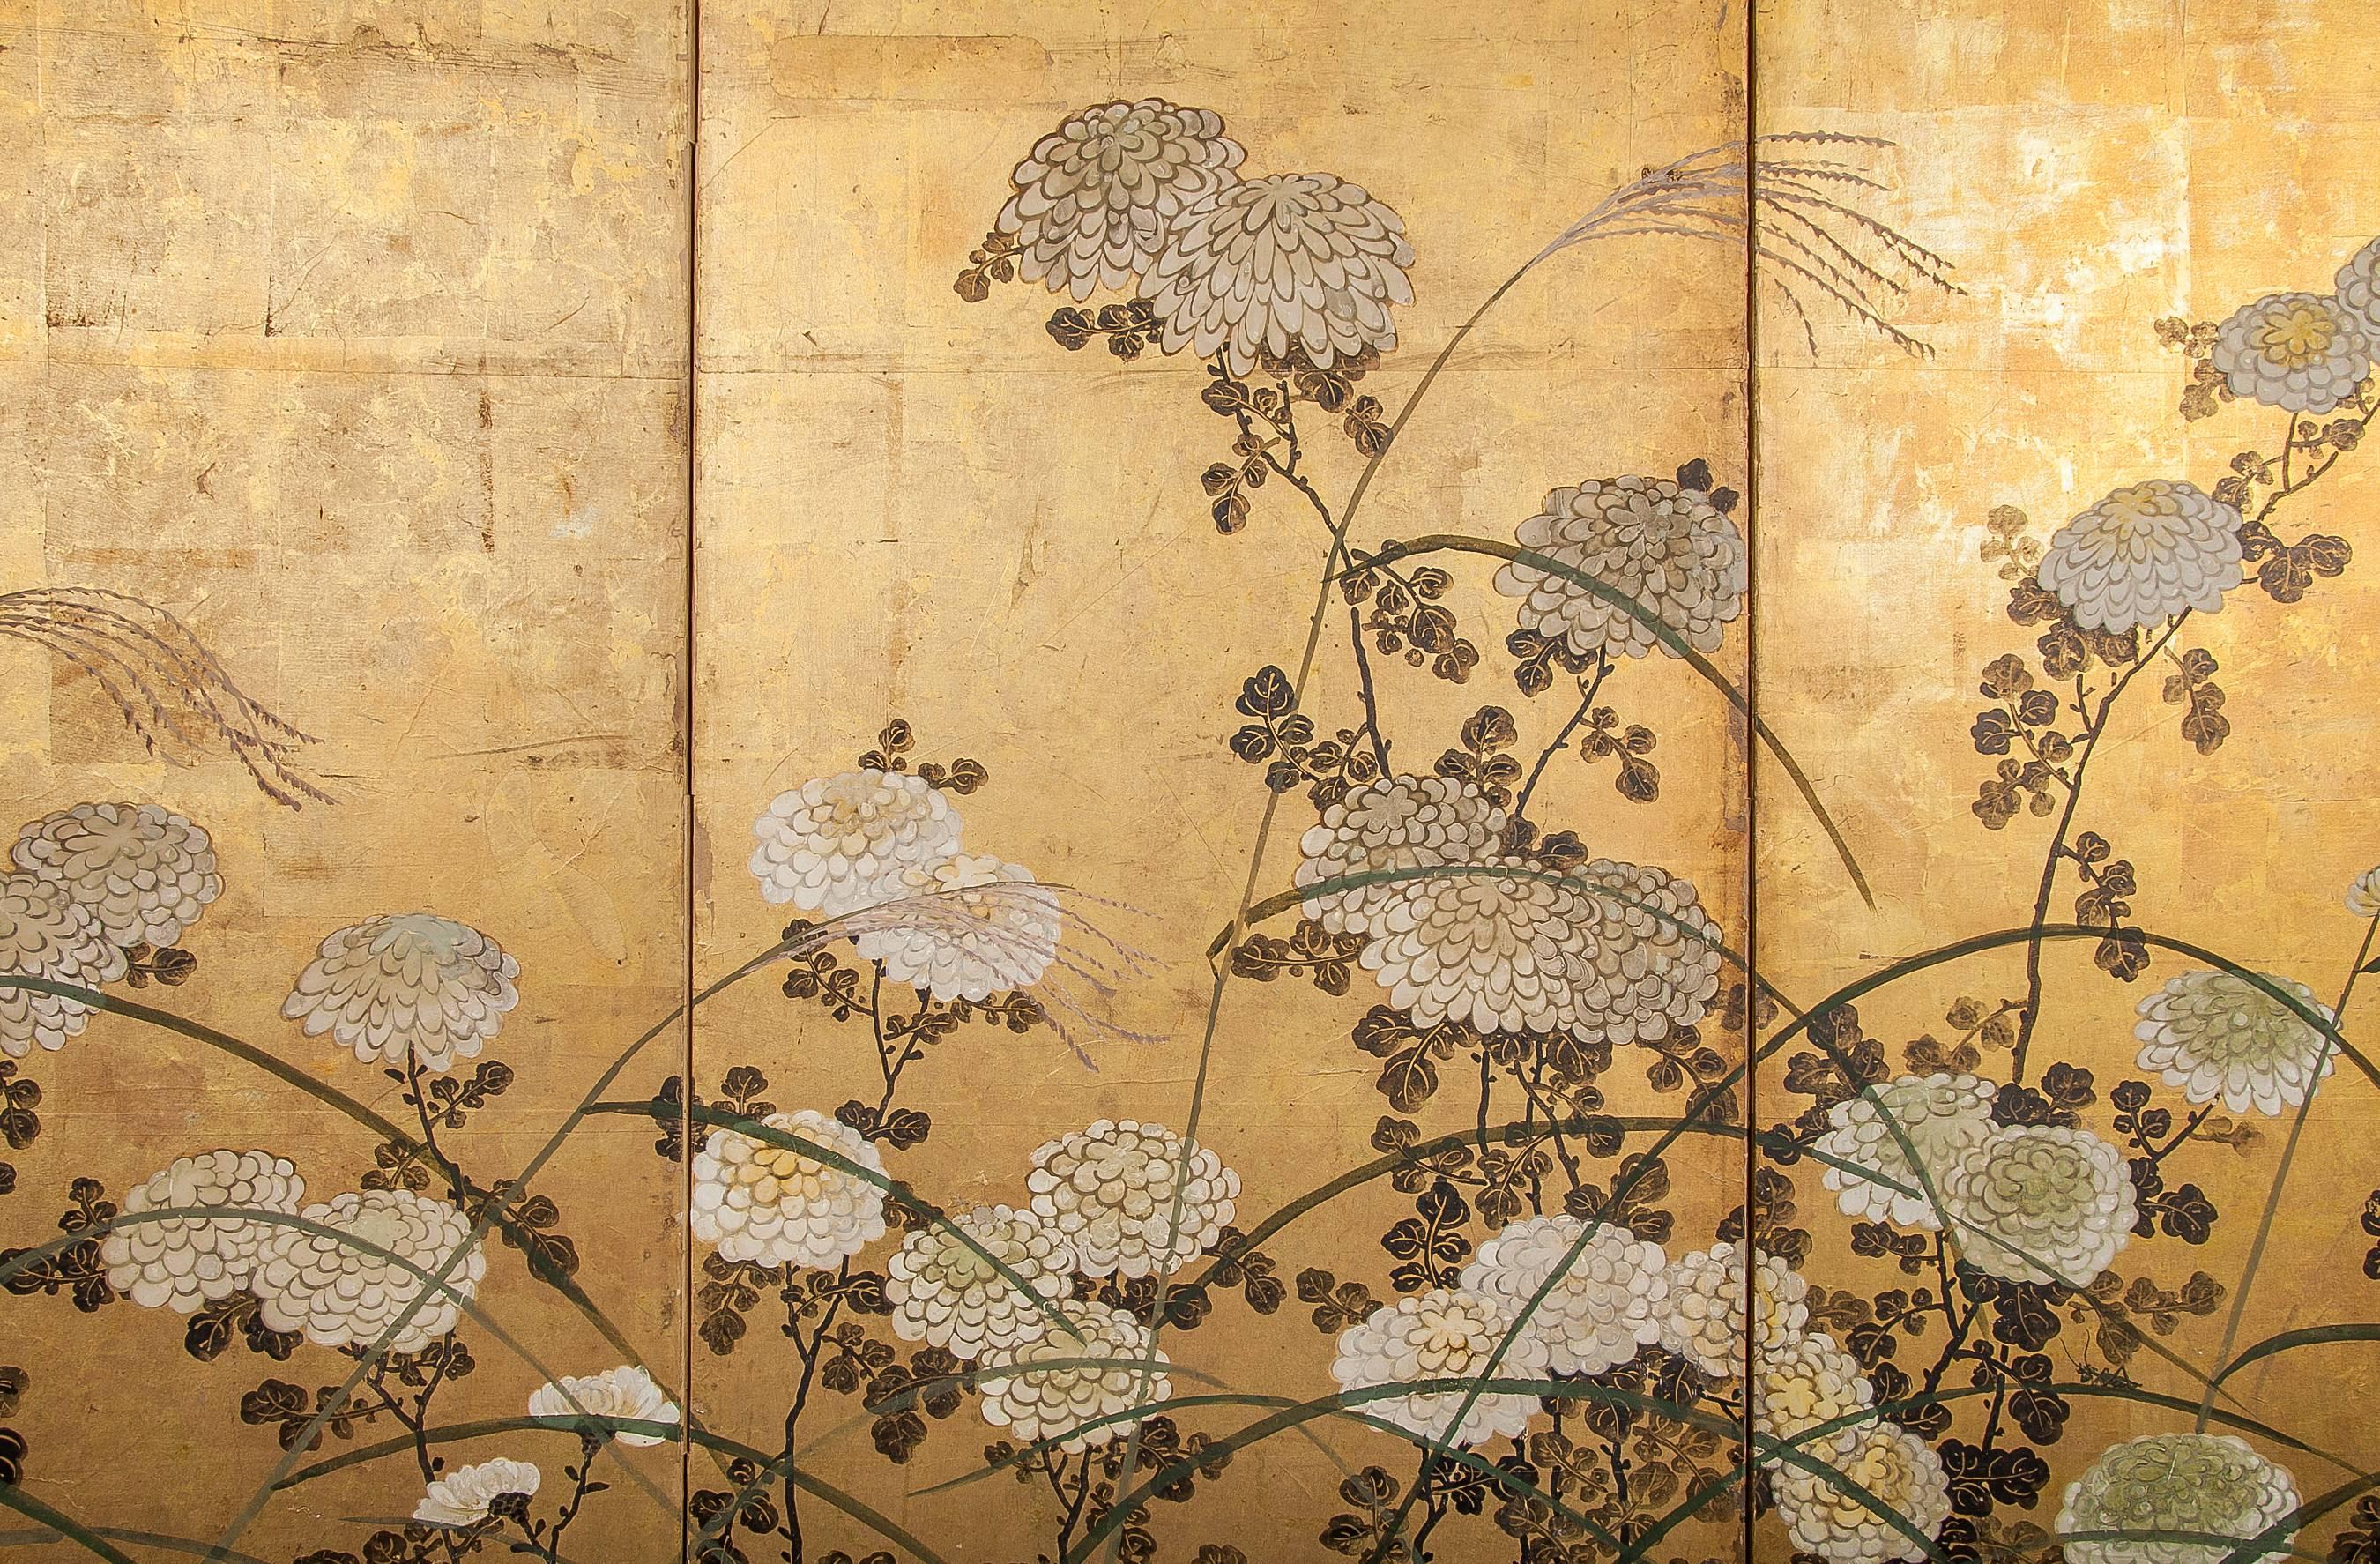 Japanese Screen White Chrysanthemums and Wild Grasses.  Chrysanthemums, or kiku, are the official symbol of imperial Japan.  The flower is also a symbol of national identity.  White chrysanthemums are thought to be particularly good luck, and here